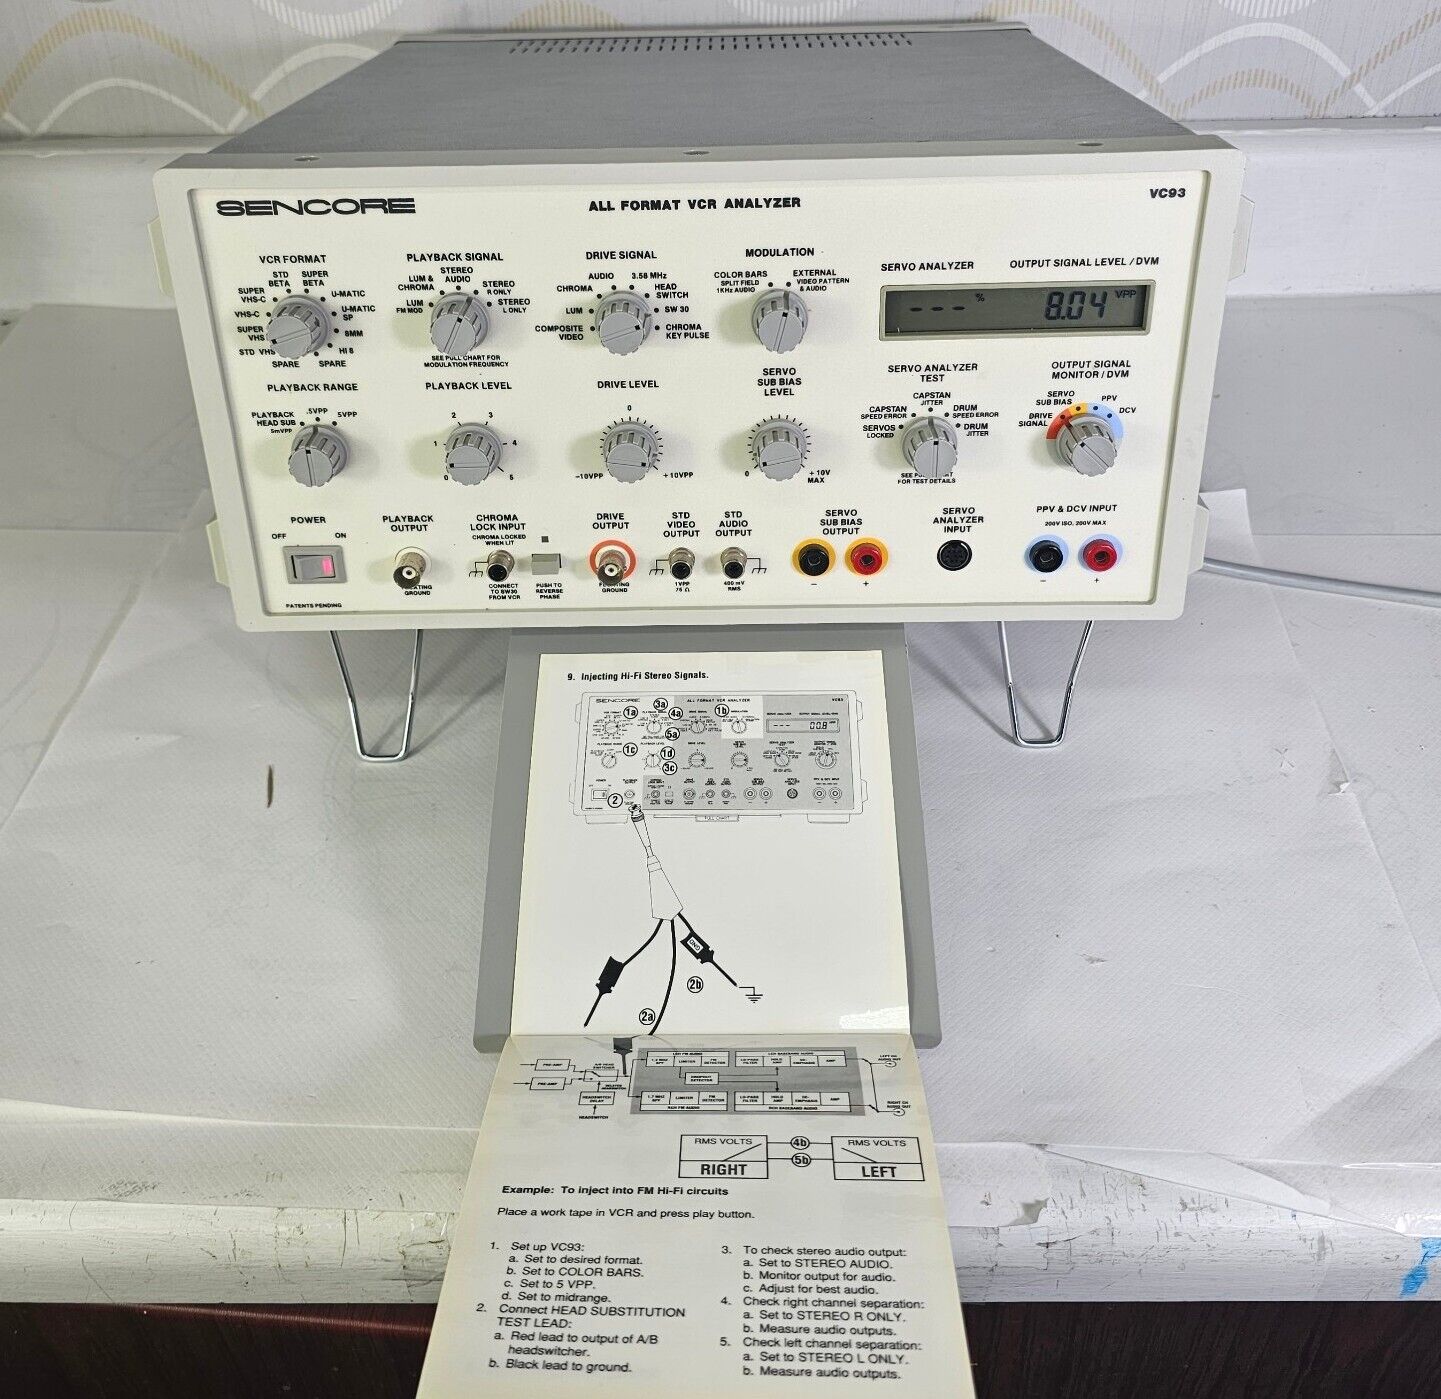 Working Sencore  All Format VCR Analyzer Model VC93 With Manual